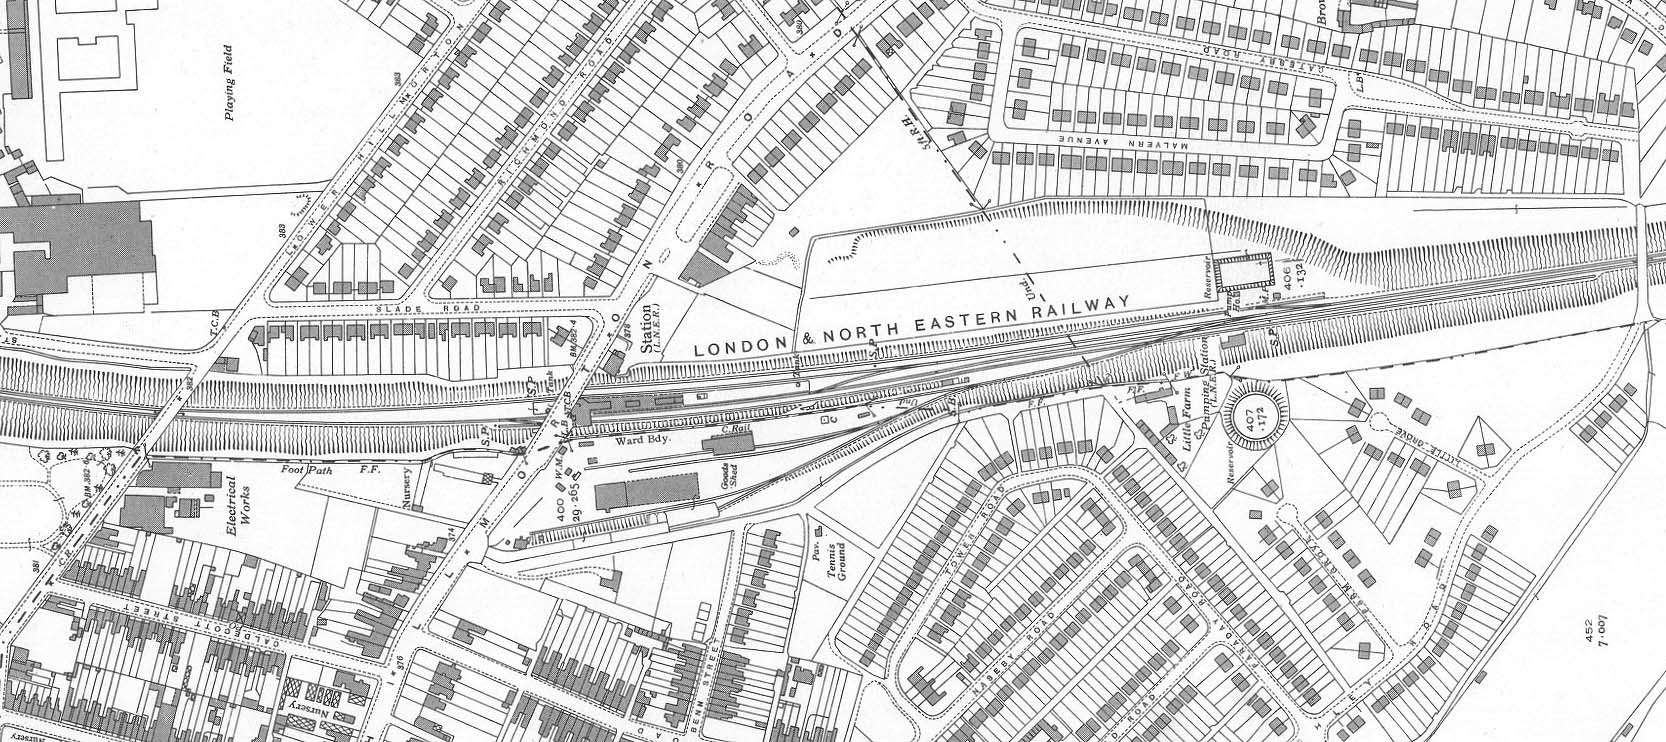 A 1939 25 inches to the mile Ordnance Survey Map of Rugby's Great Central station and refuge sidings